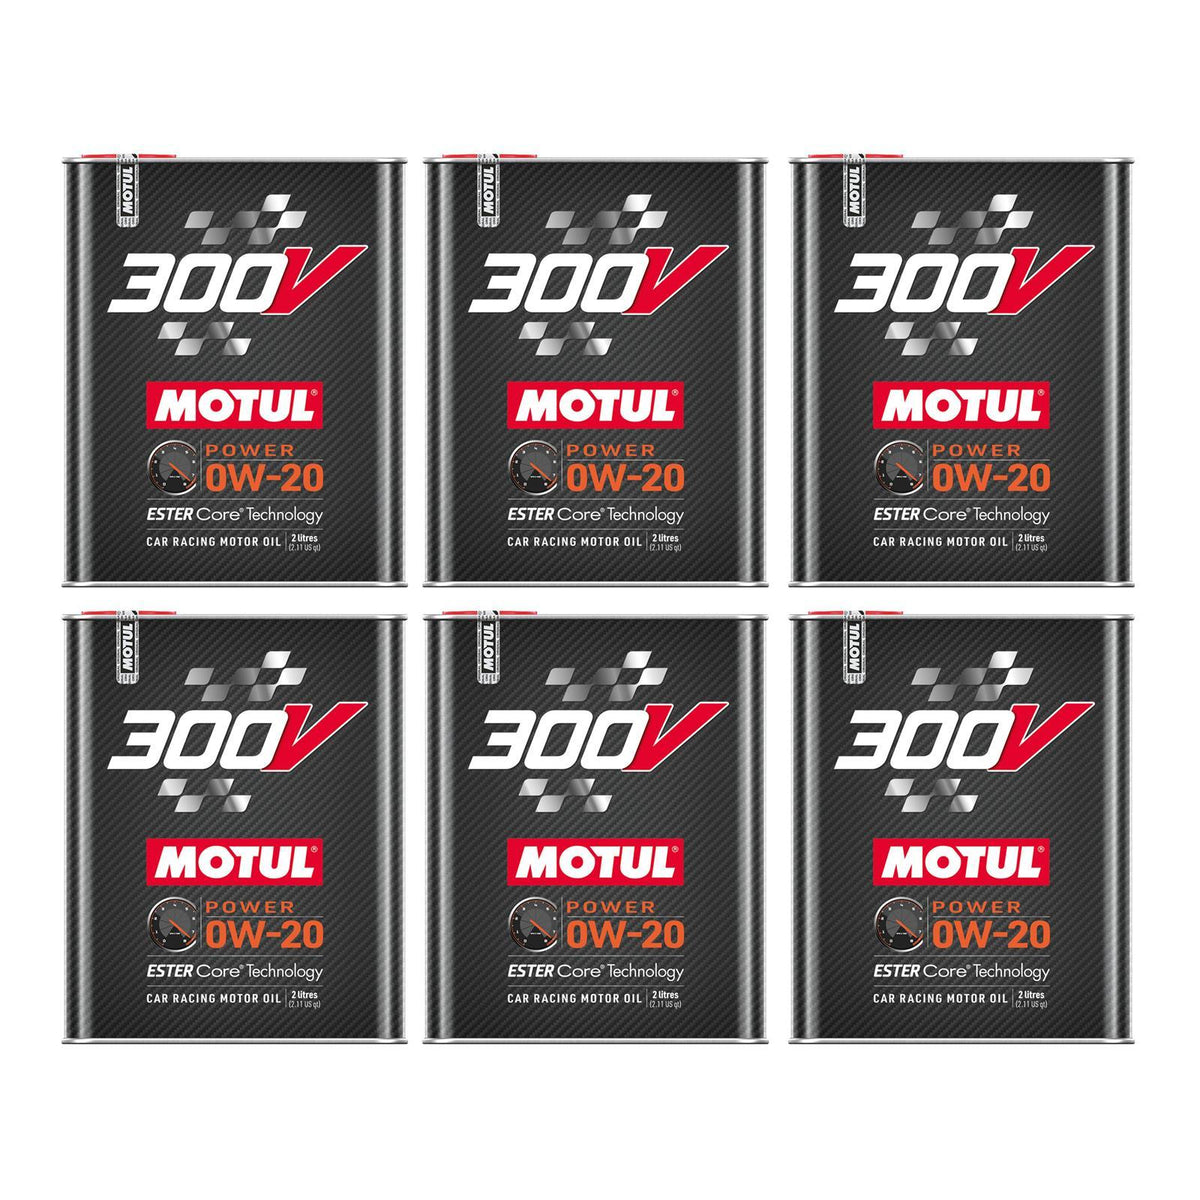 300V 0w20 Racing Oil Synthetic Case 6x2 Liter